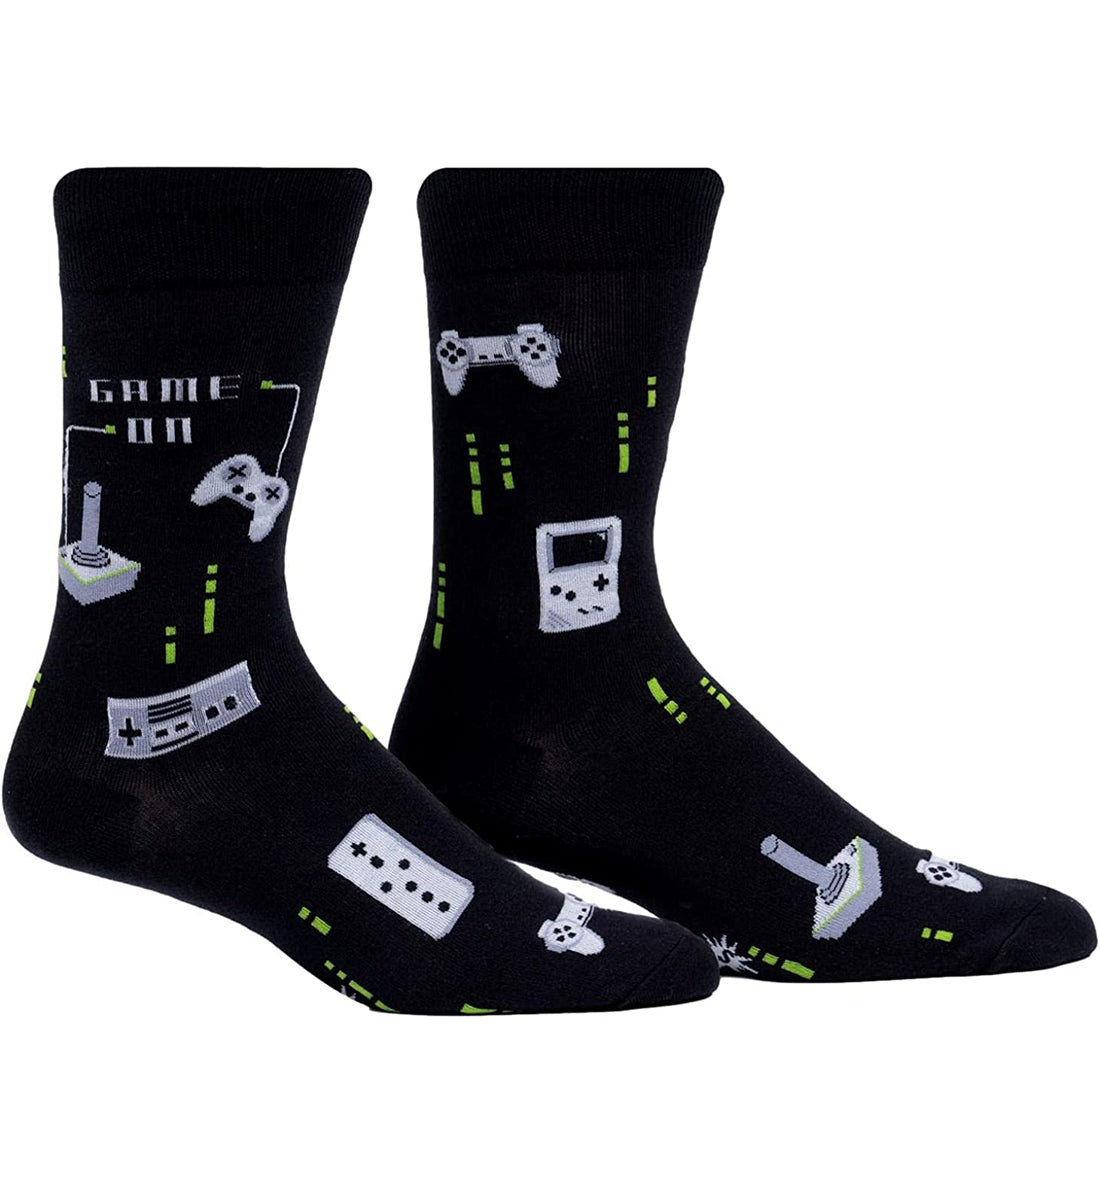 SOCK it to me Men's Crew Socks (MEF0546),Game On - Game On,One Size